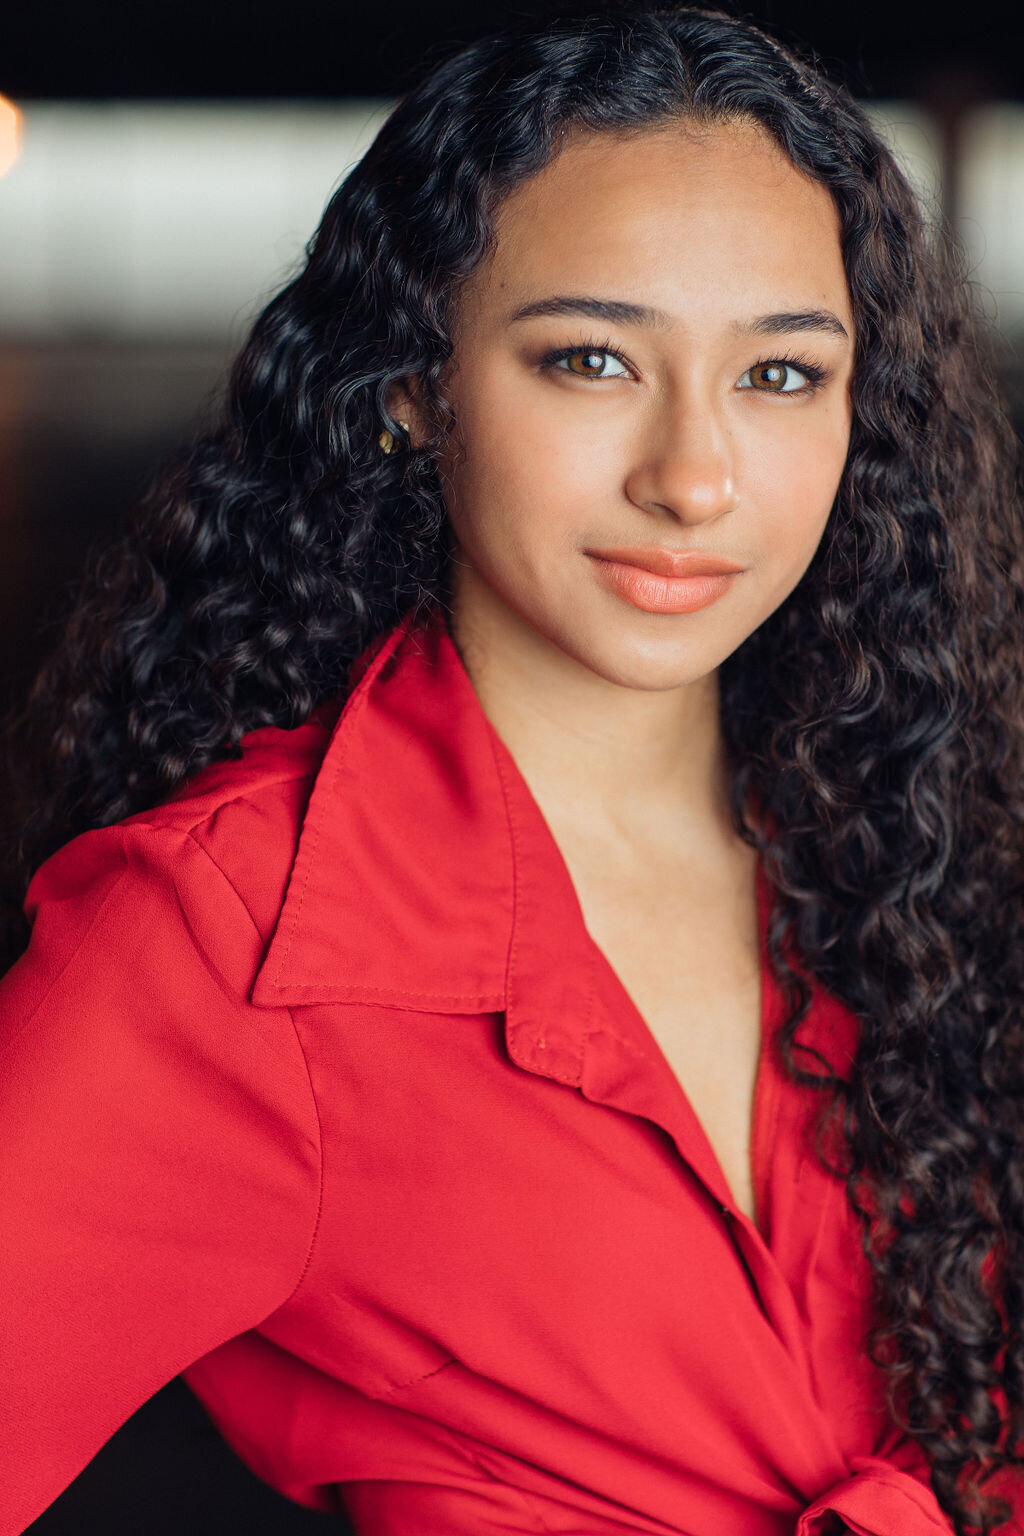 Headshot Photograph Of Young Woman In Red Blouse Los Angeles